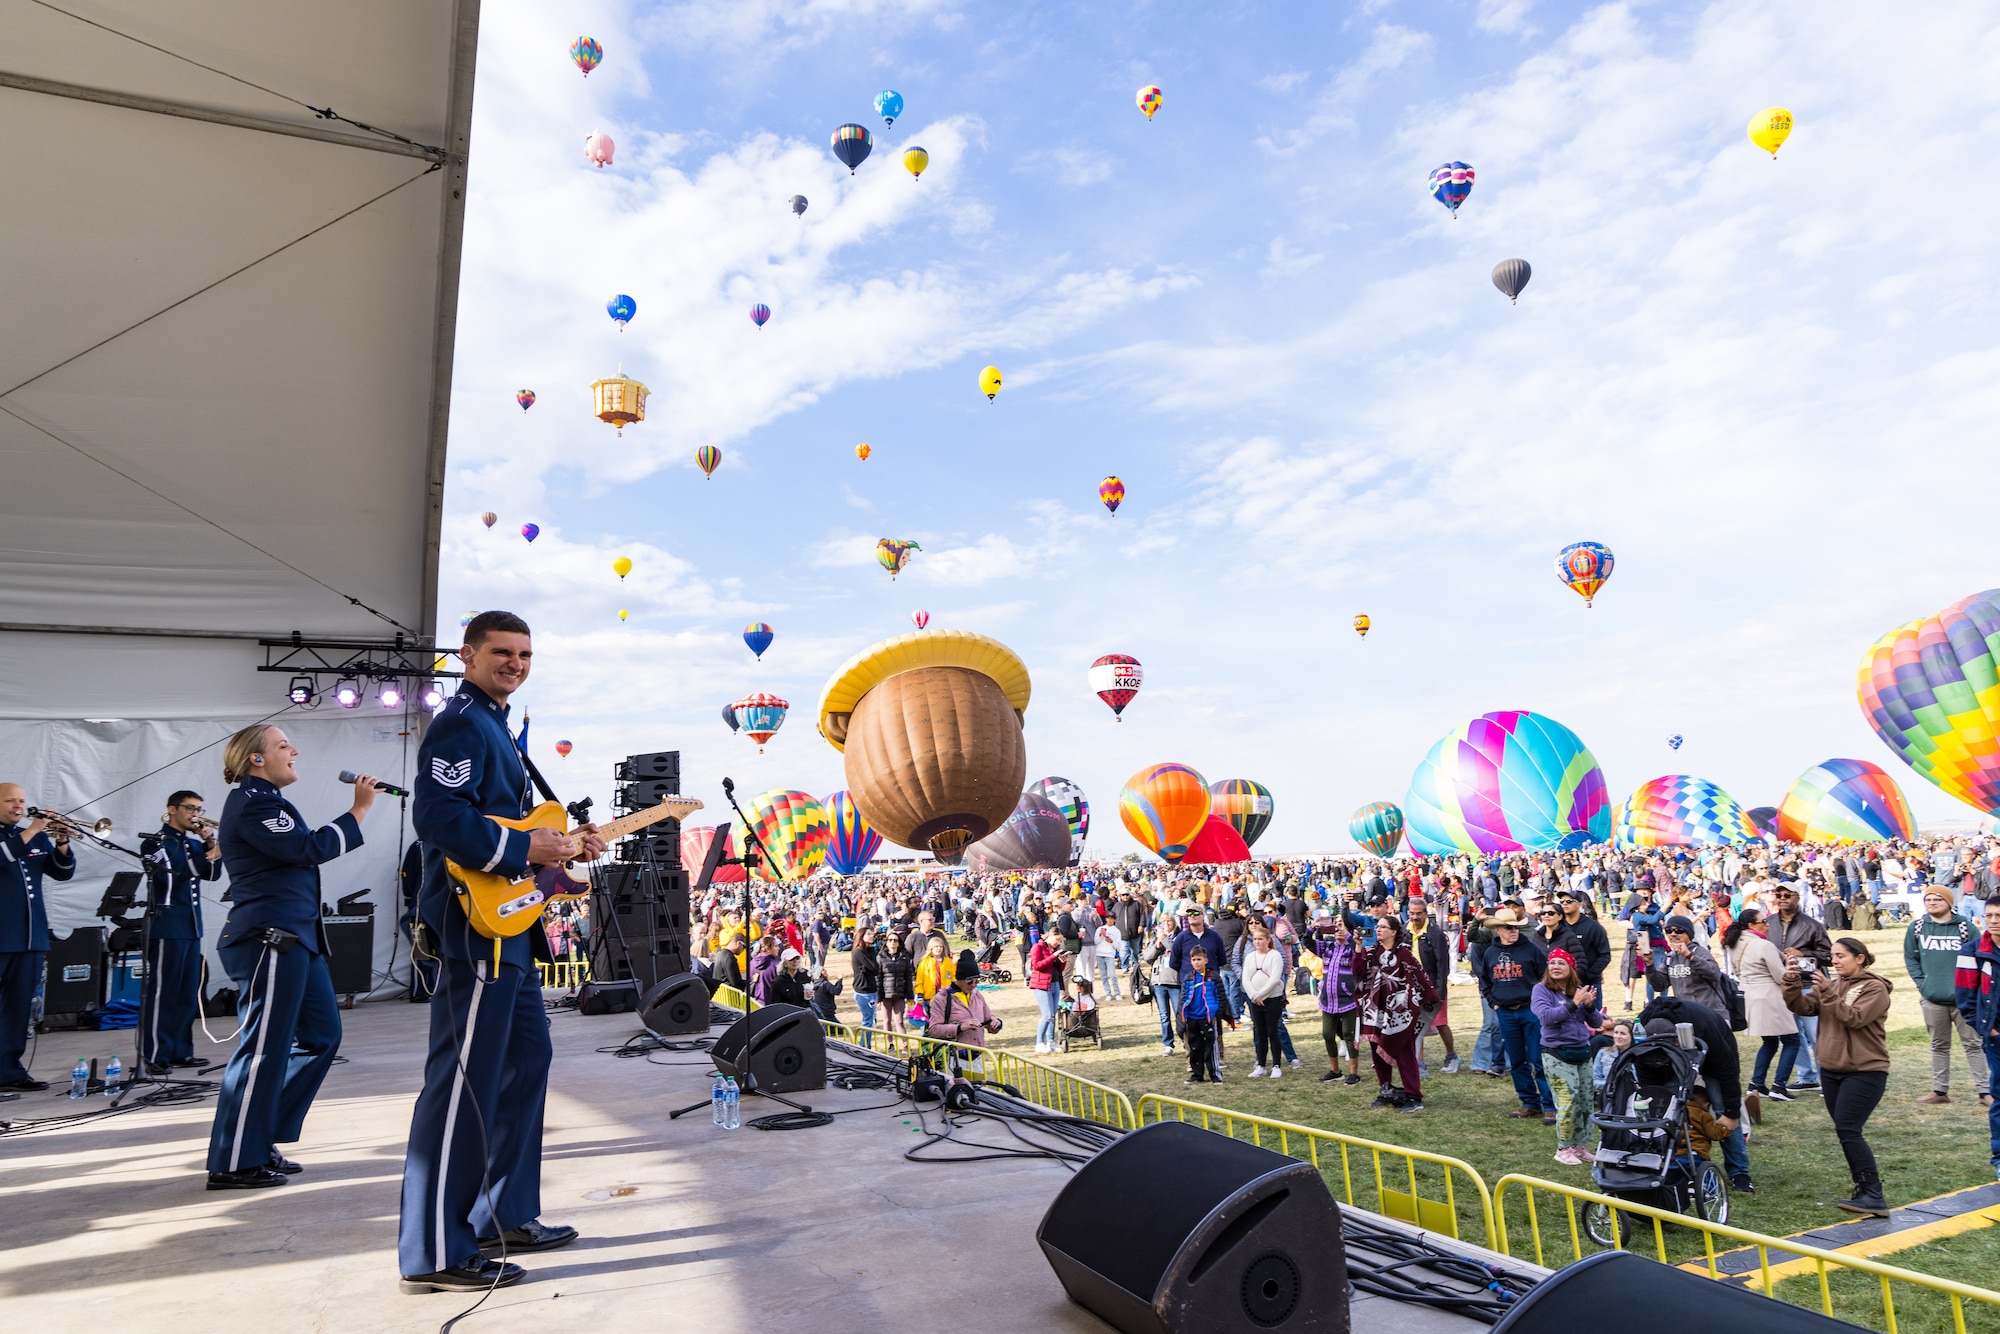 Pegasus performed at Albuquerque International Balloon Fiesta in New Mexico, 
in support of USAFA recruiting and community relations